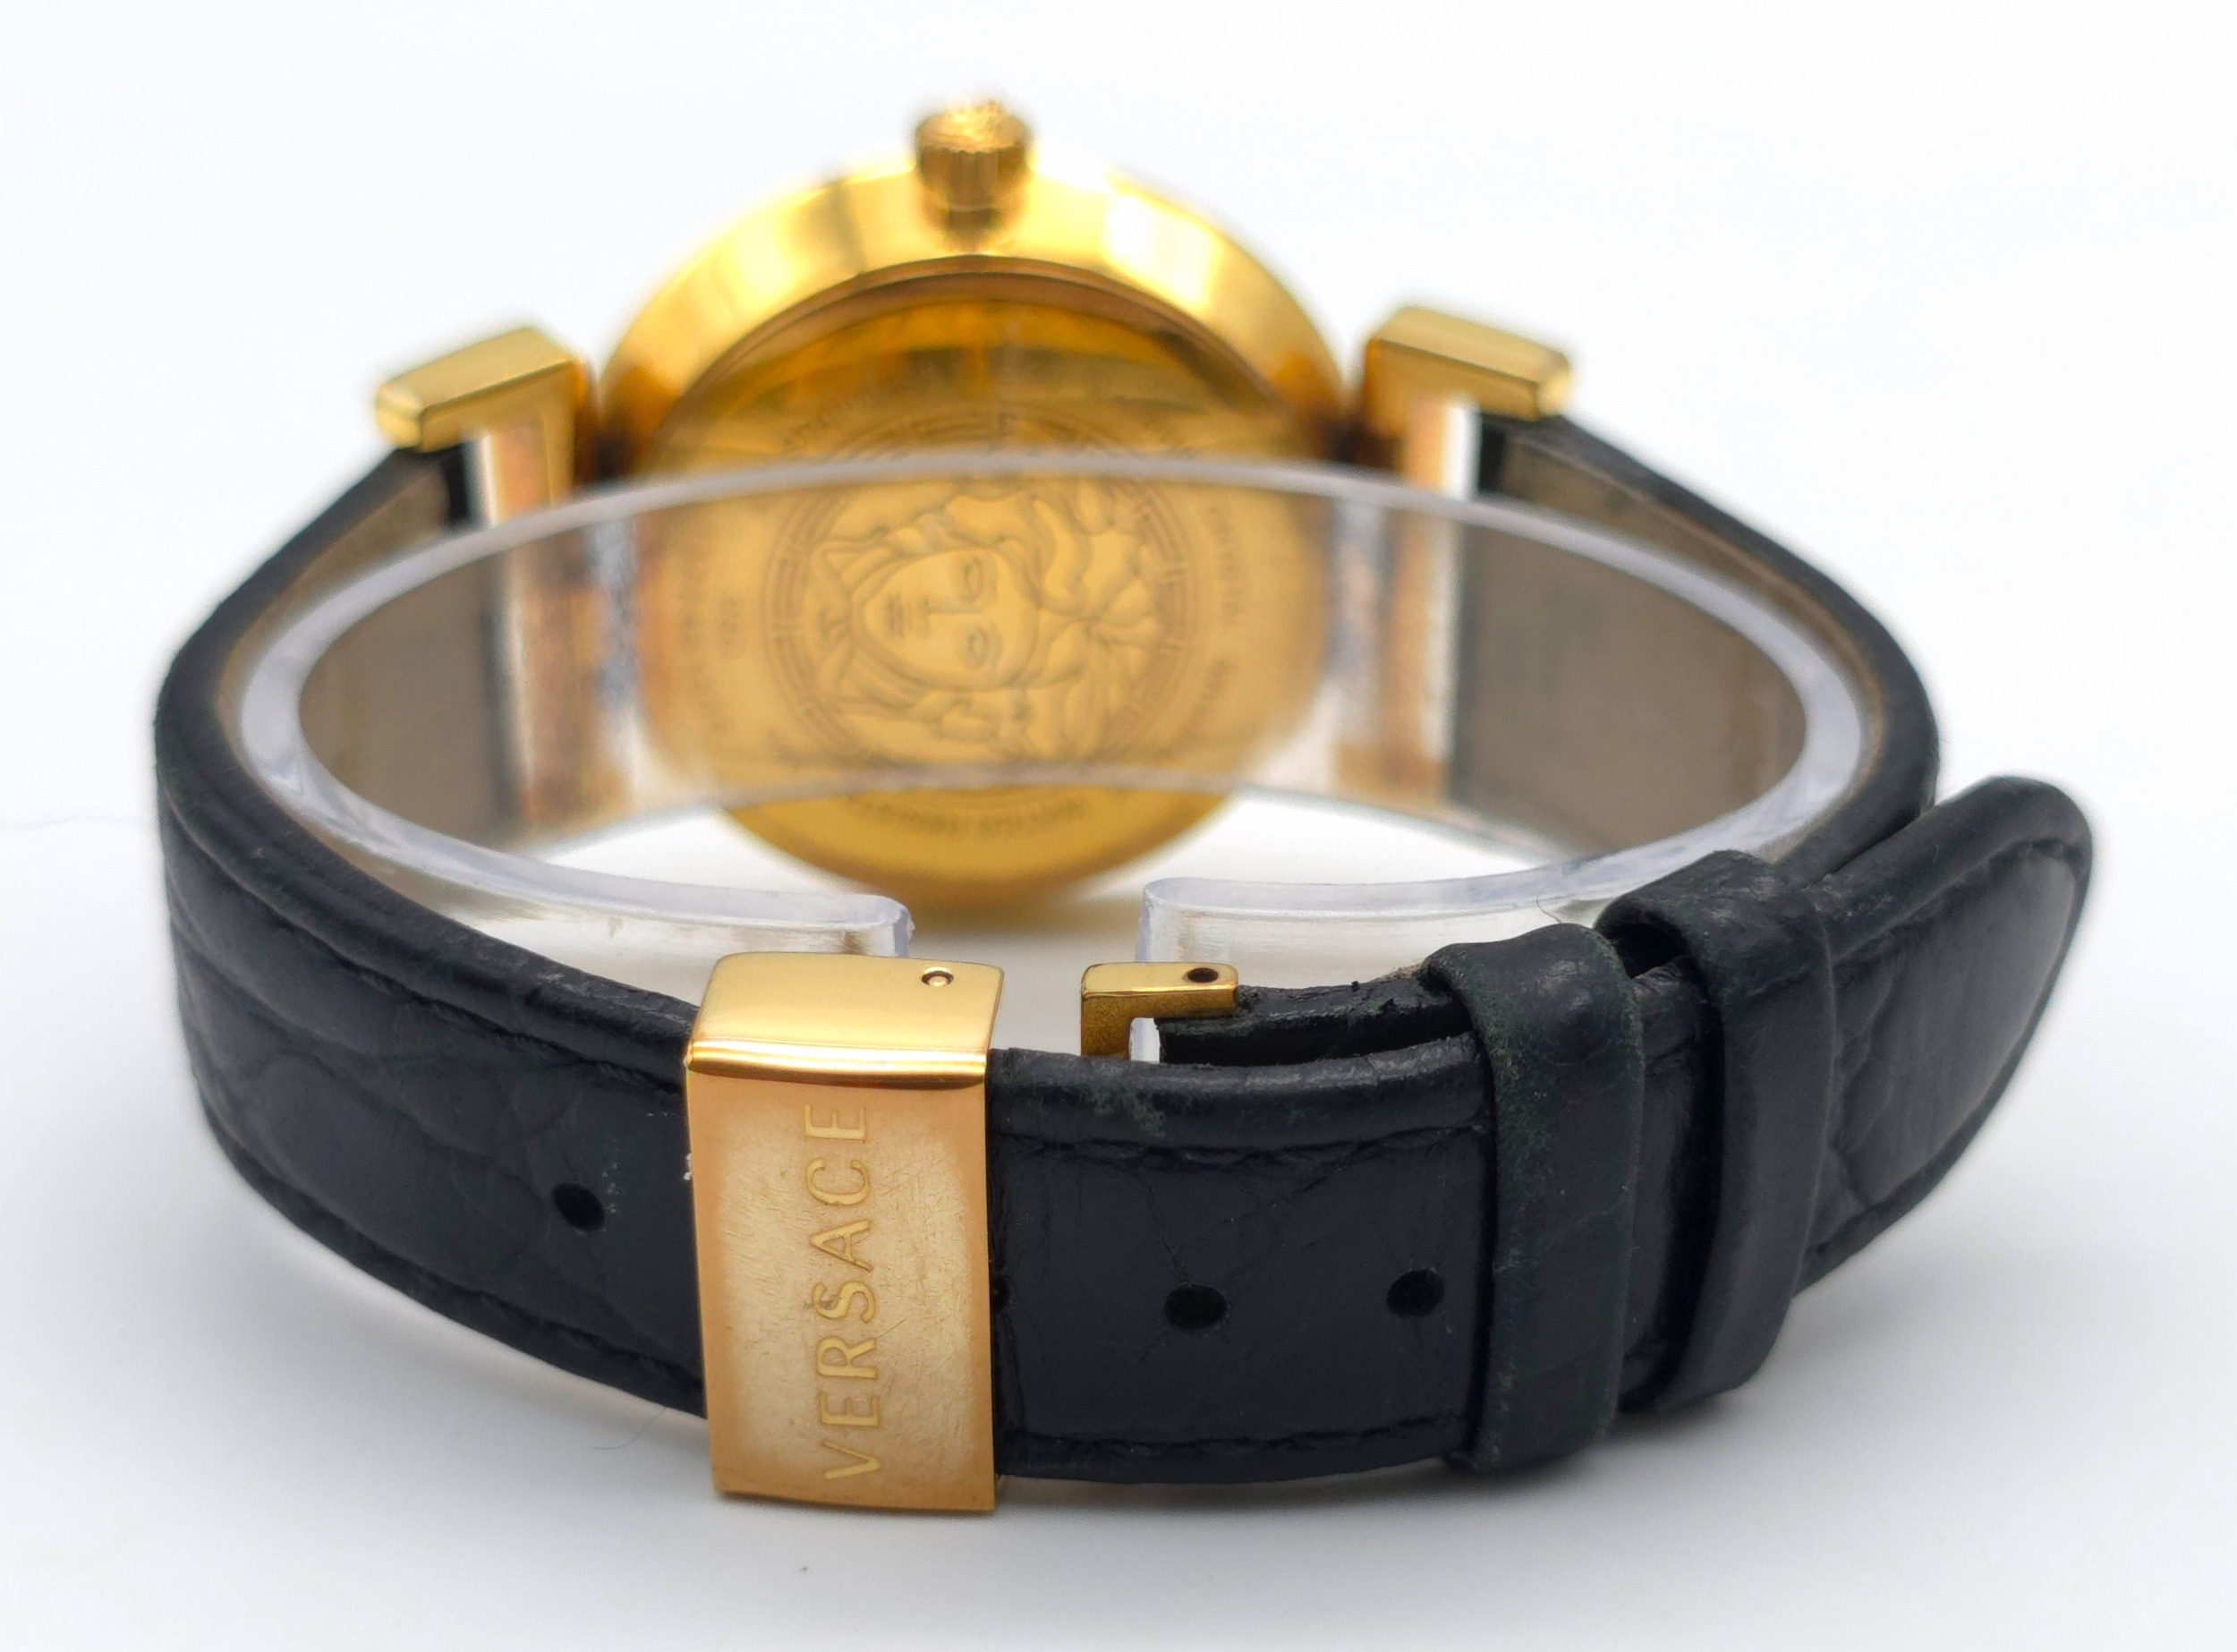 A Versace Designer Quartz Ladies Watch. Black leather and gilded strap and case - 35mm. Black dial - Image 4 of 8